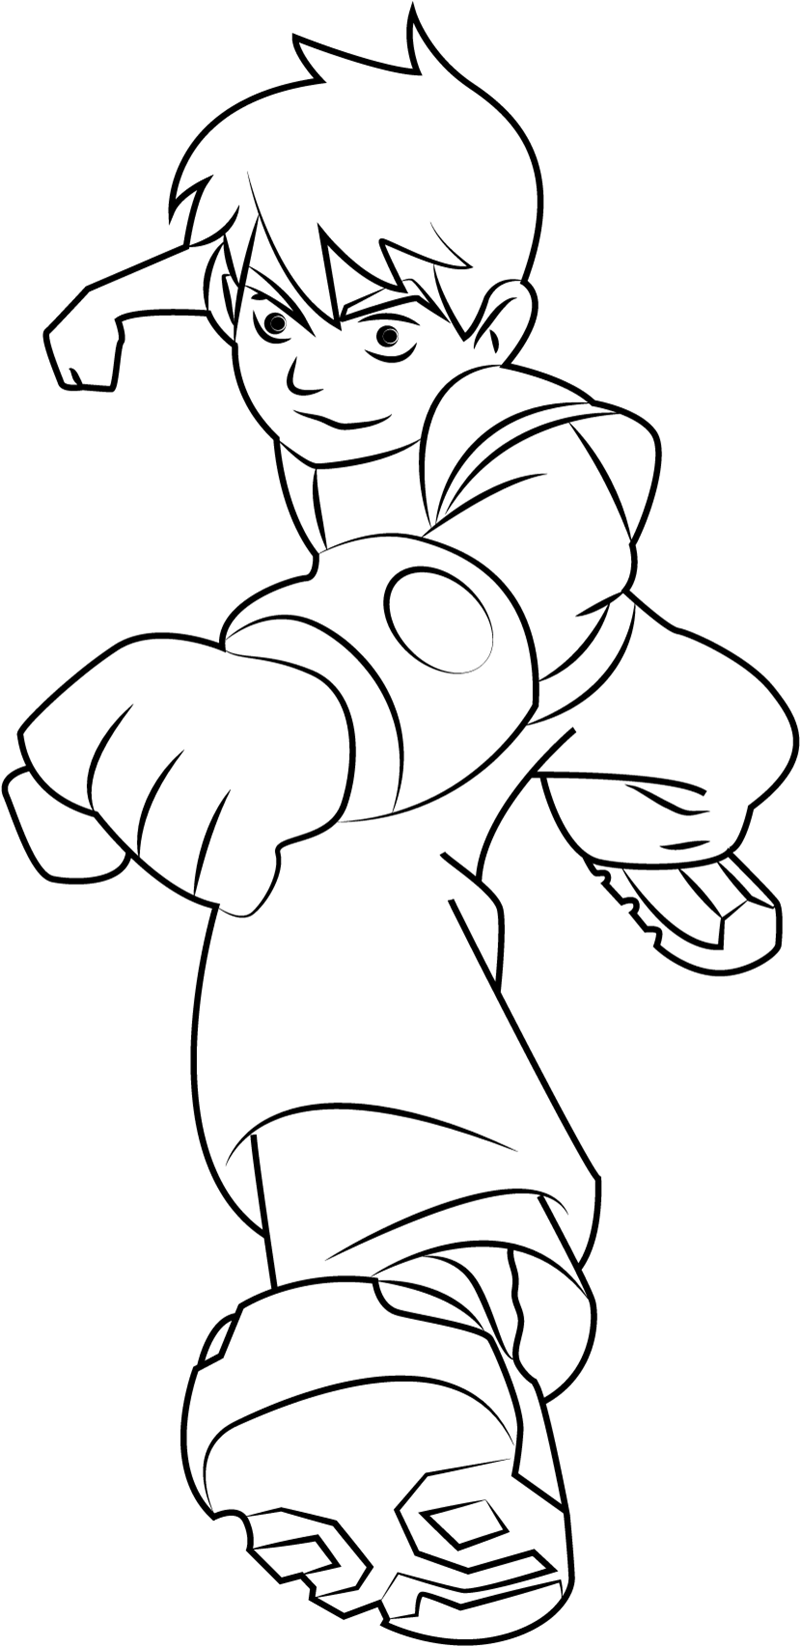 Ben 10 Running Coloring Page